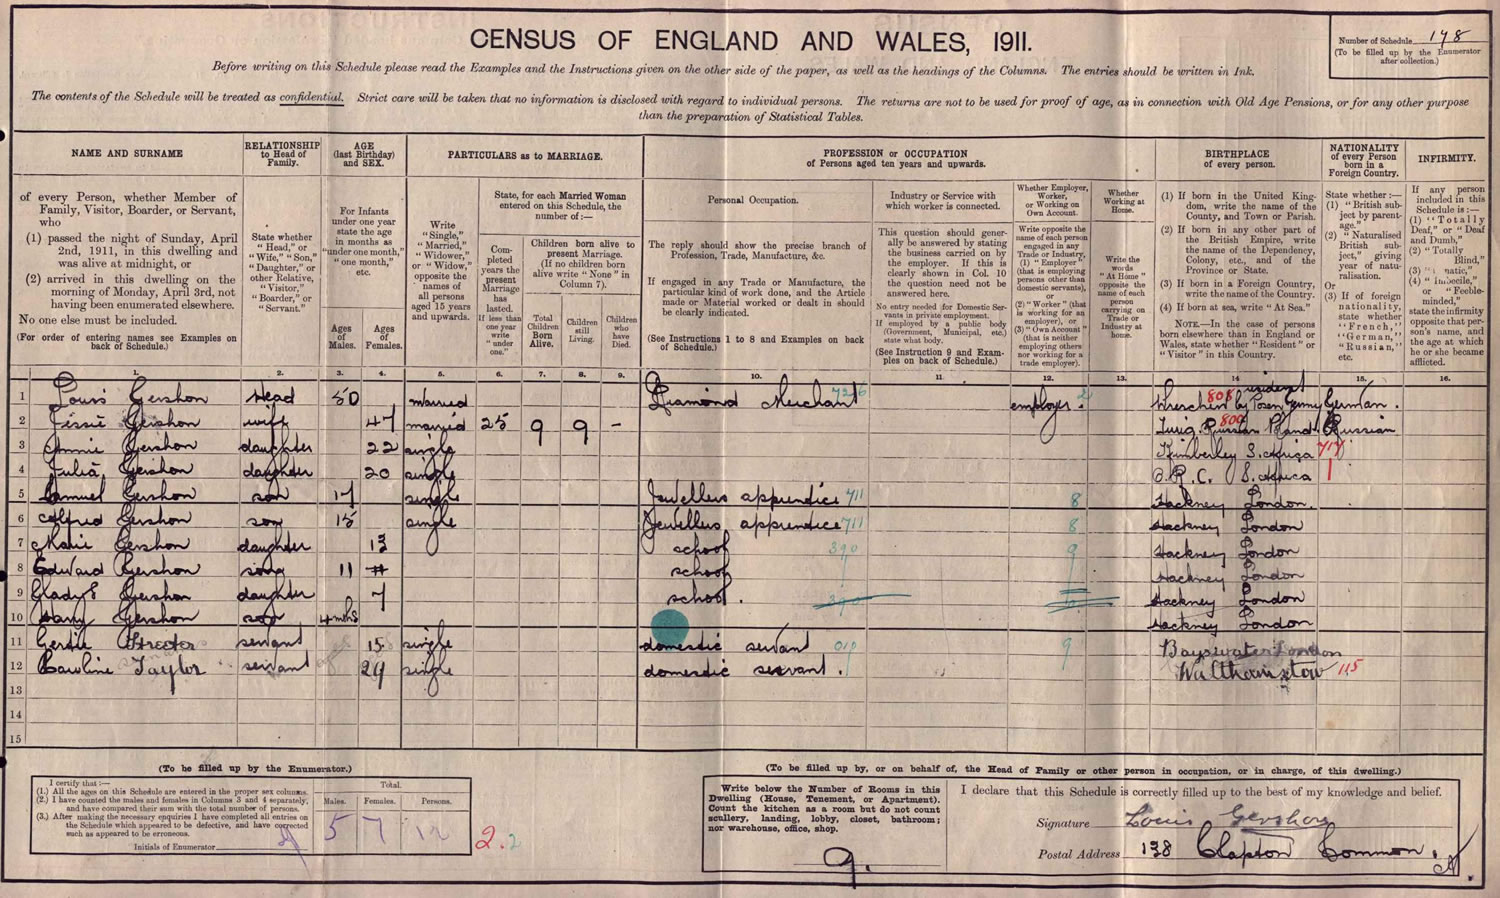 The 1911 census on TheGenealogist reveals that Samuel was a 17 year old Jeweller's apprentice at the time